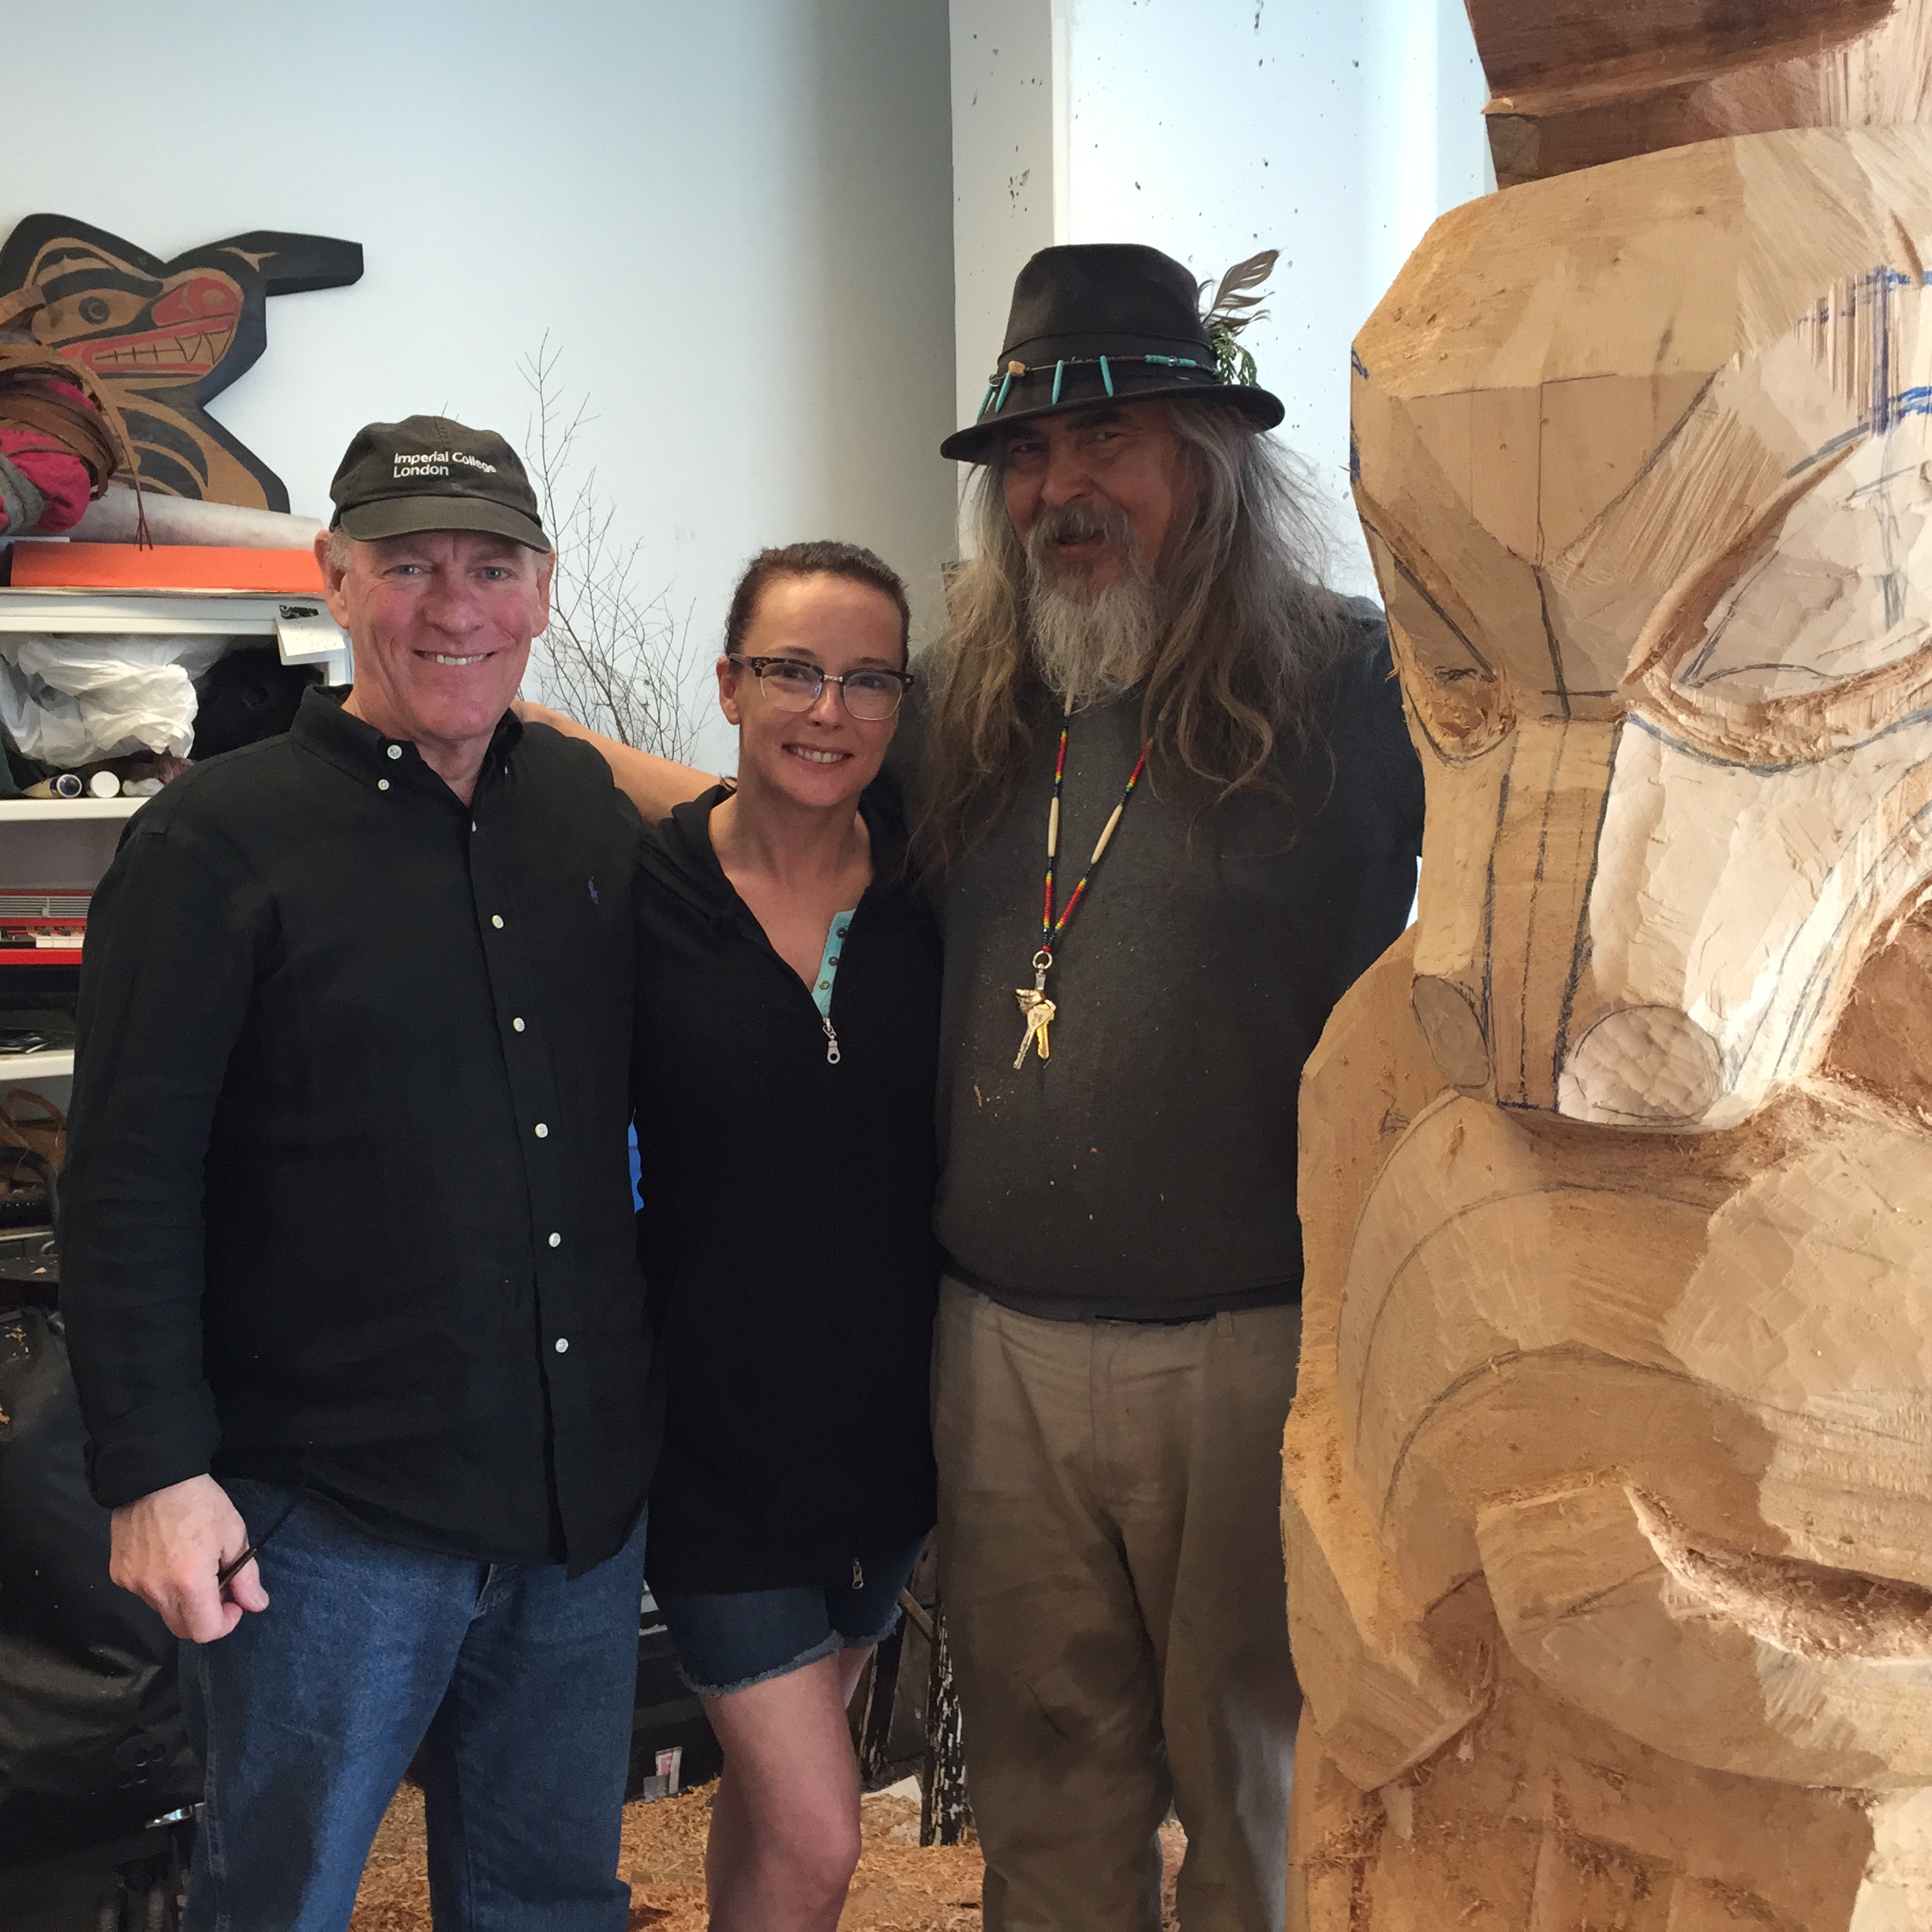 Randall Perry, LaTiesha Fazakas and artist Beau Dick, Vancouver Canada during filming 